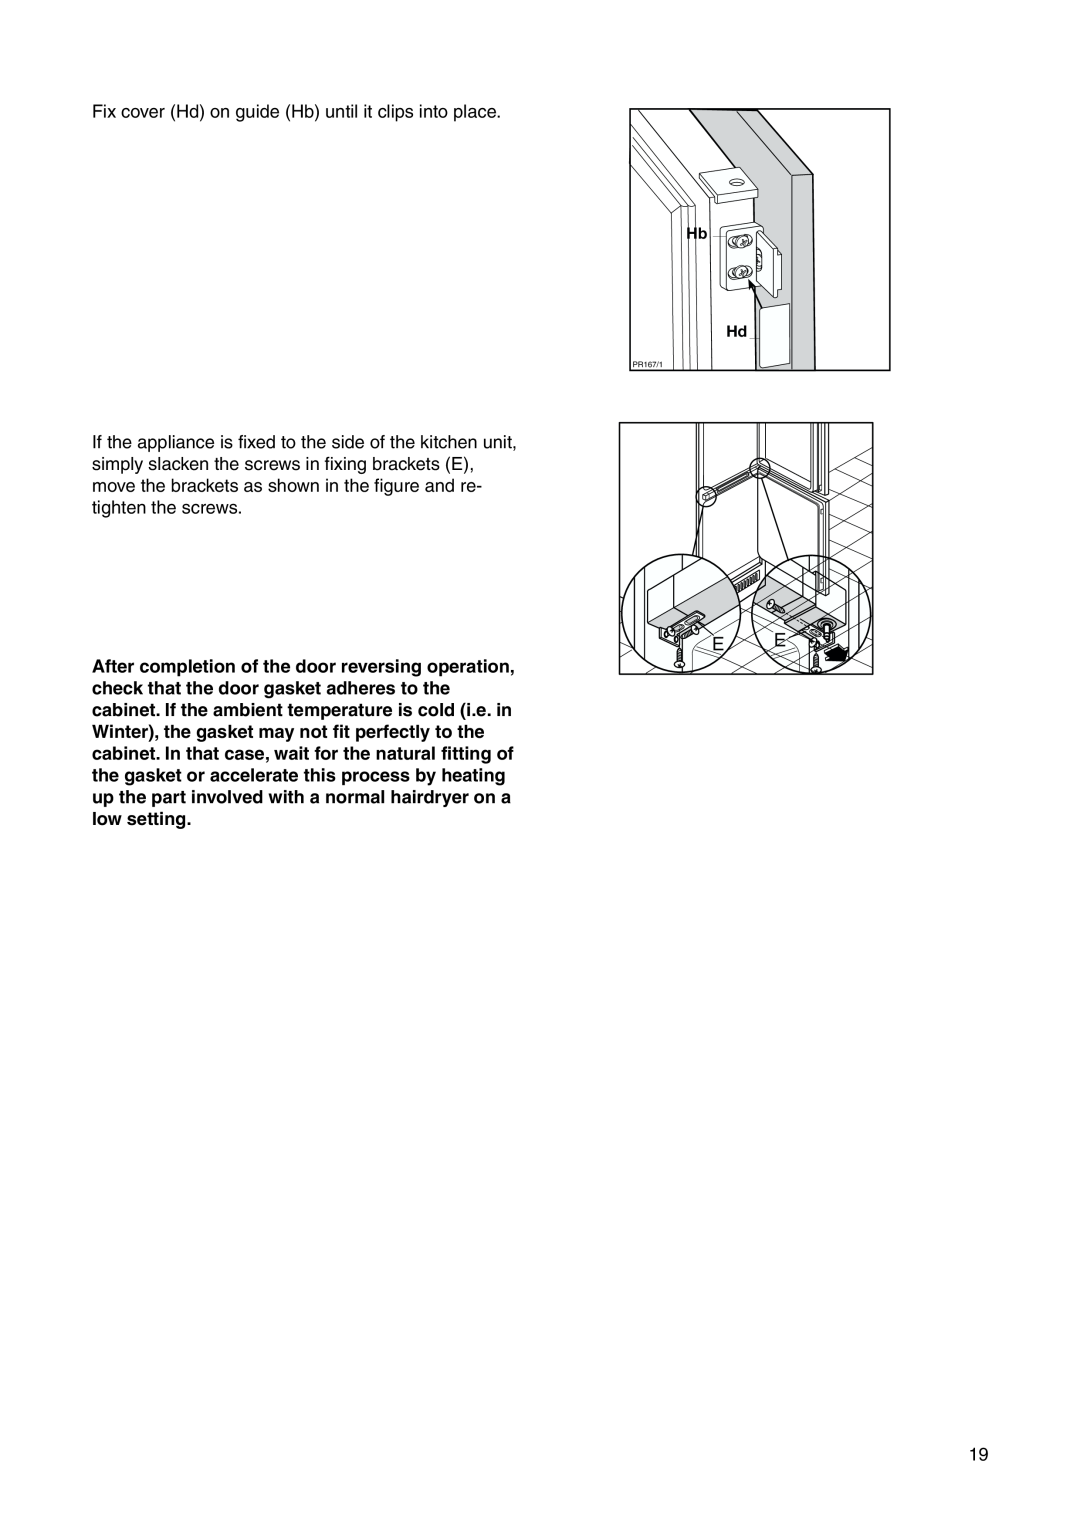 Electrolux 2223 208-81 user manual Fix cover Hd on guide Hb until it clips into place 